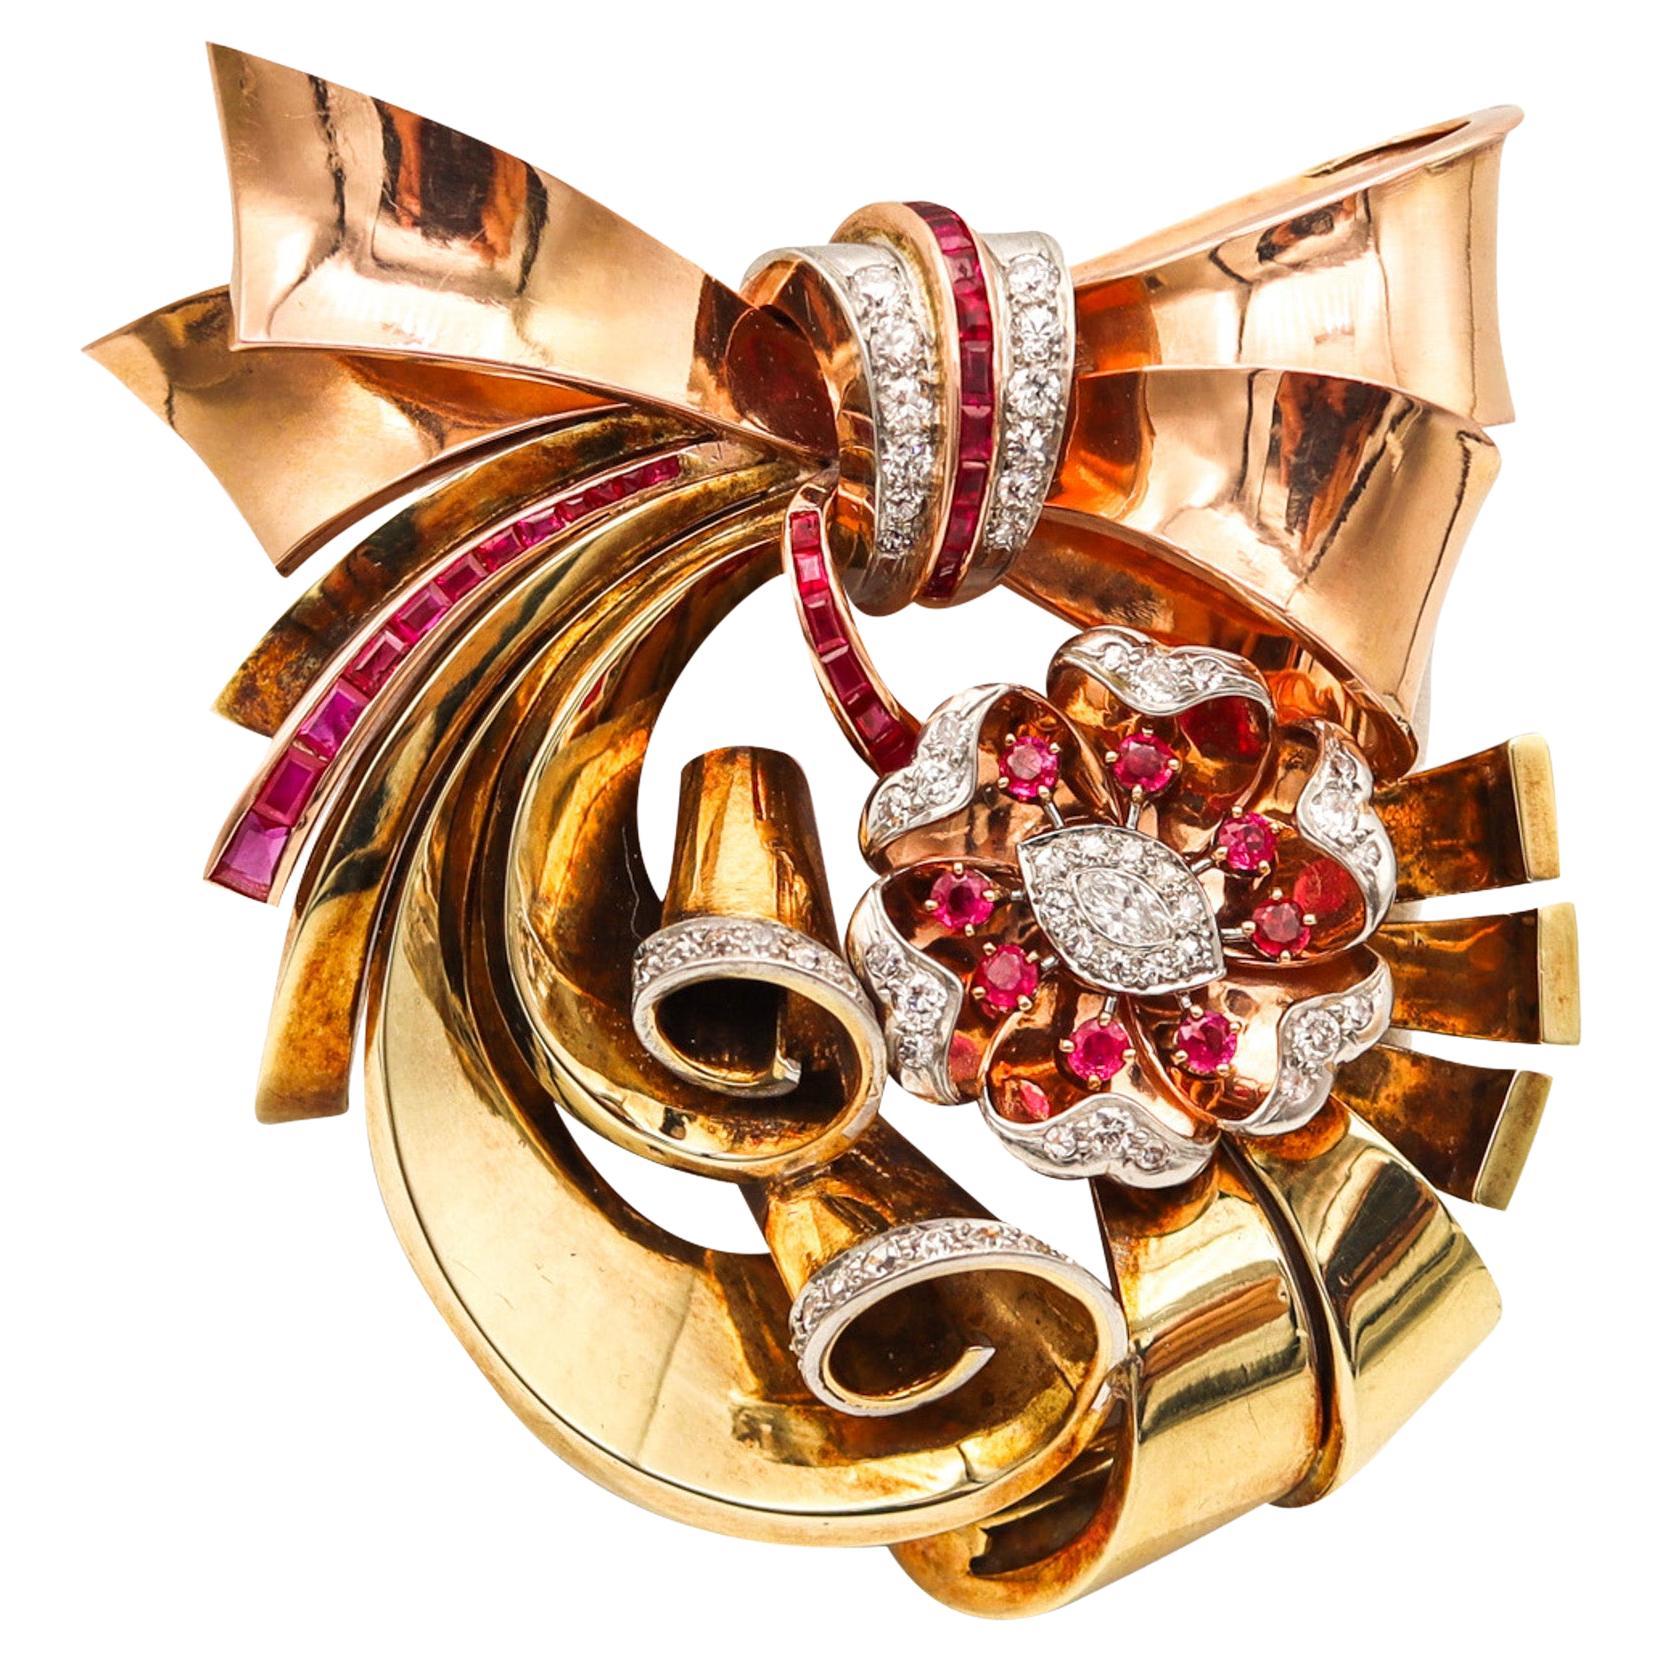 Retro Machine Age 1940 Brooch in 14k with 6.02ctw in Diamonds and Rubies